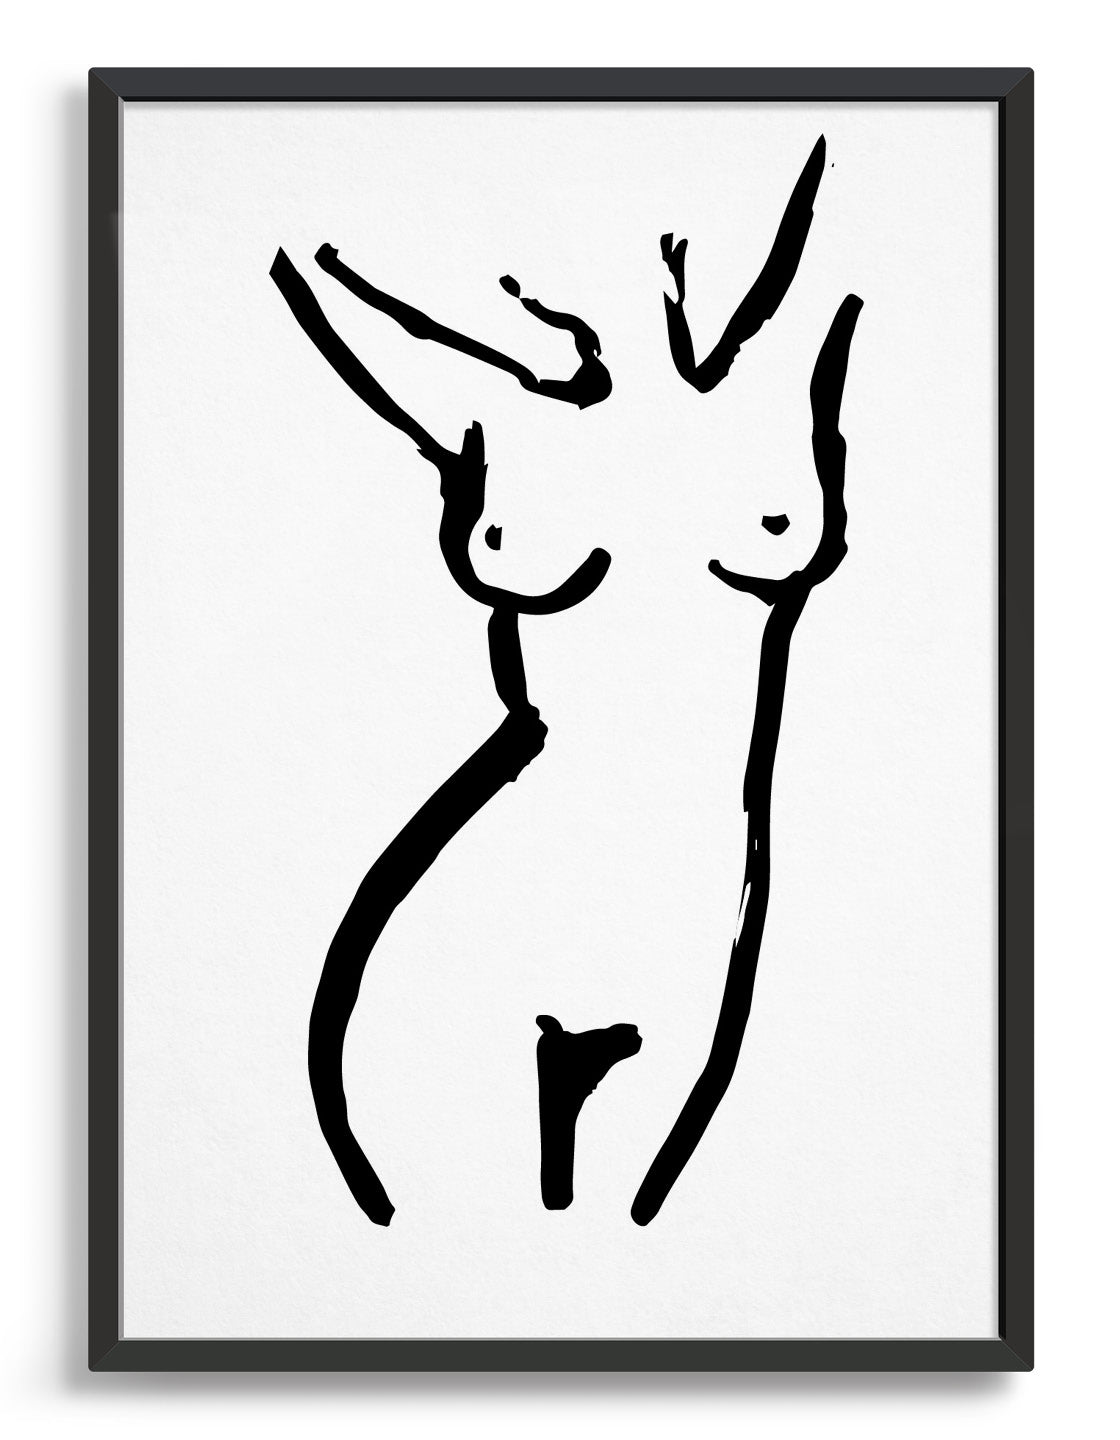 Monochrome line drawing of a female nude with hands behind her head